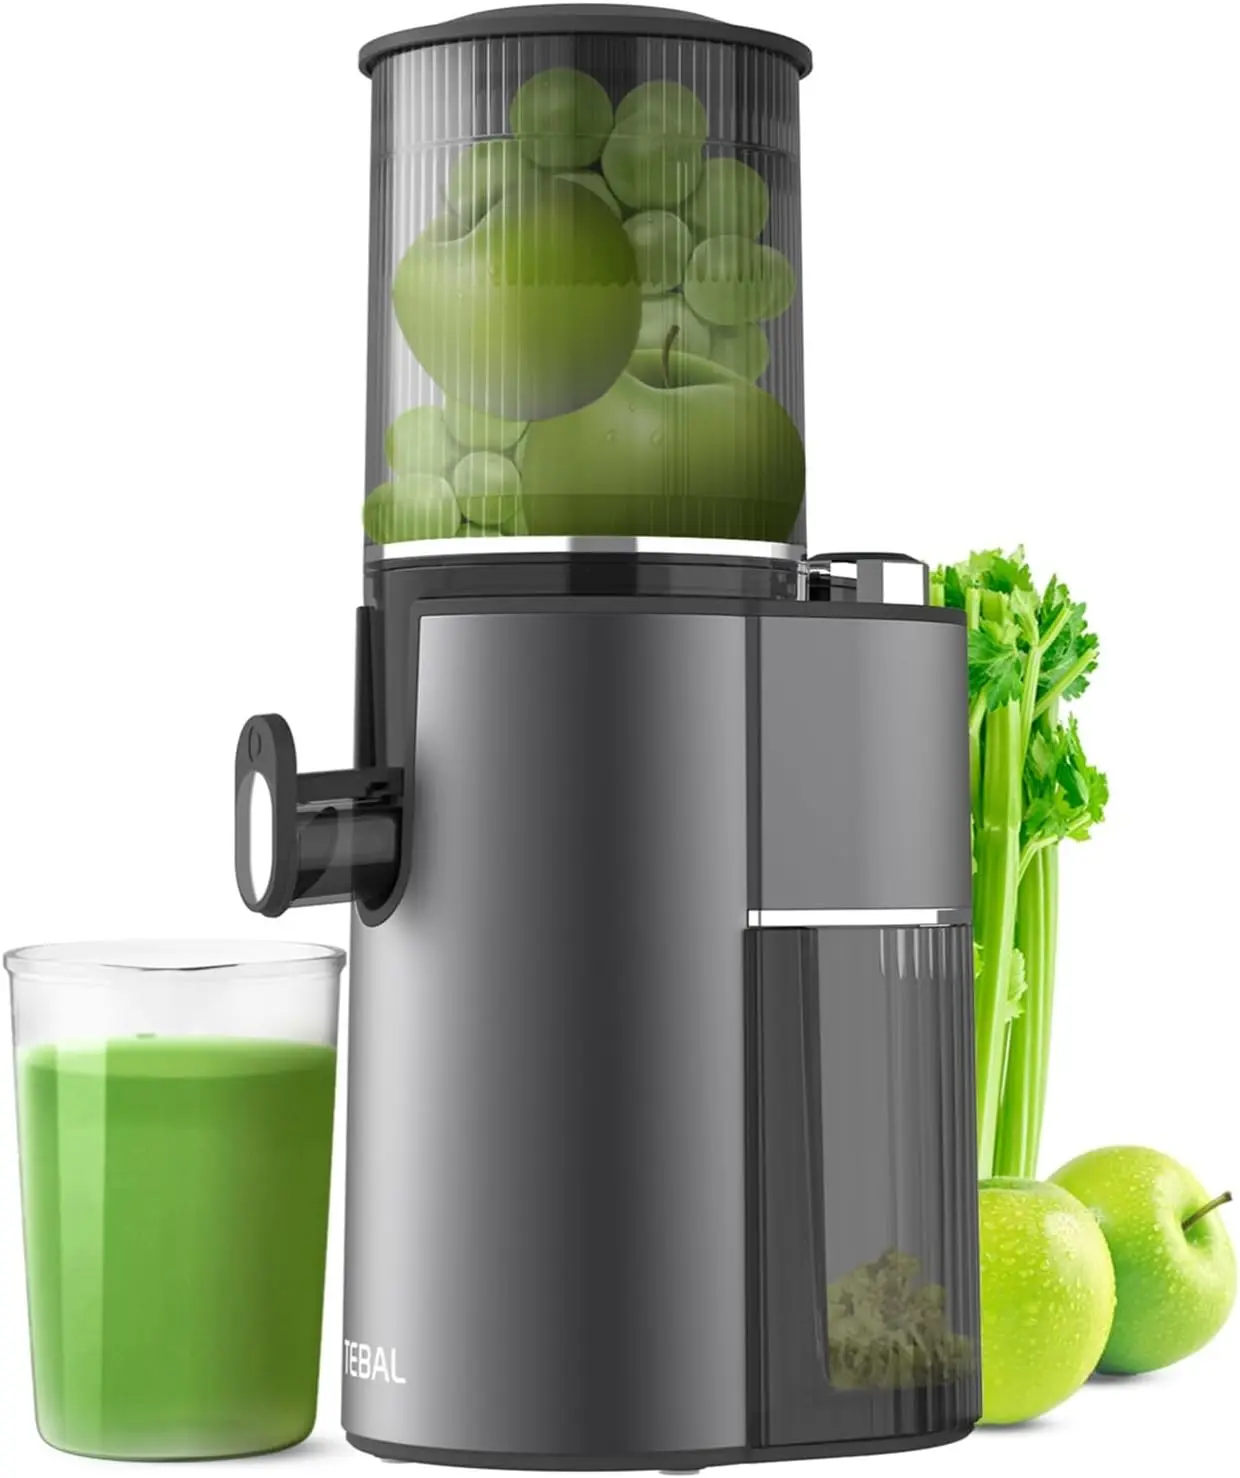 

Masticating Juicer, Master Cold Press Juicer with 4.1-inch (104mm) Extra Large Rotary Feed Chute, Slow Electric Juicer Machines